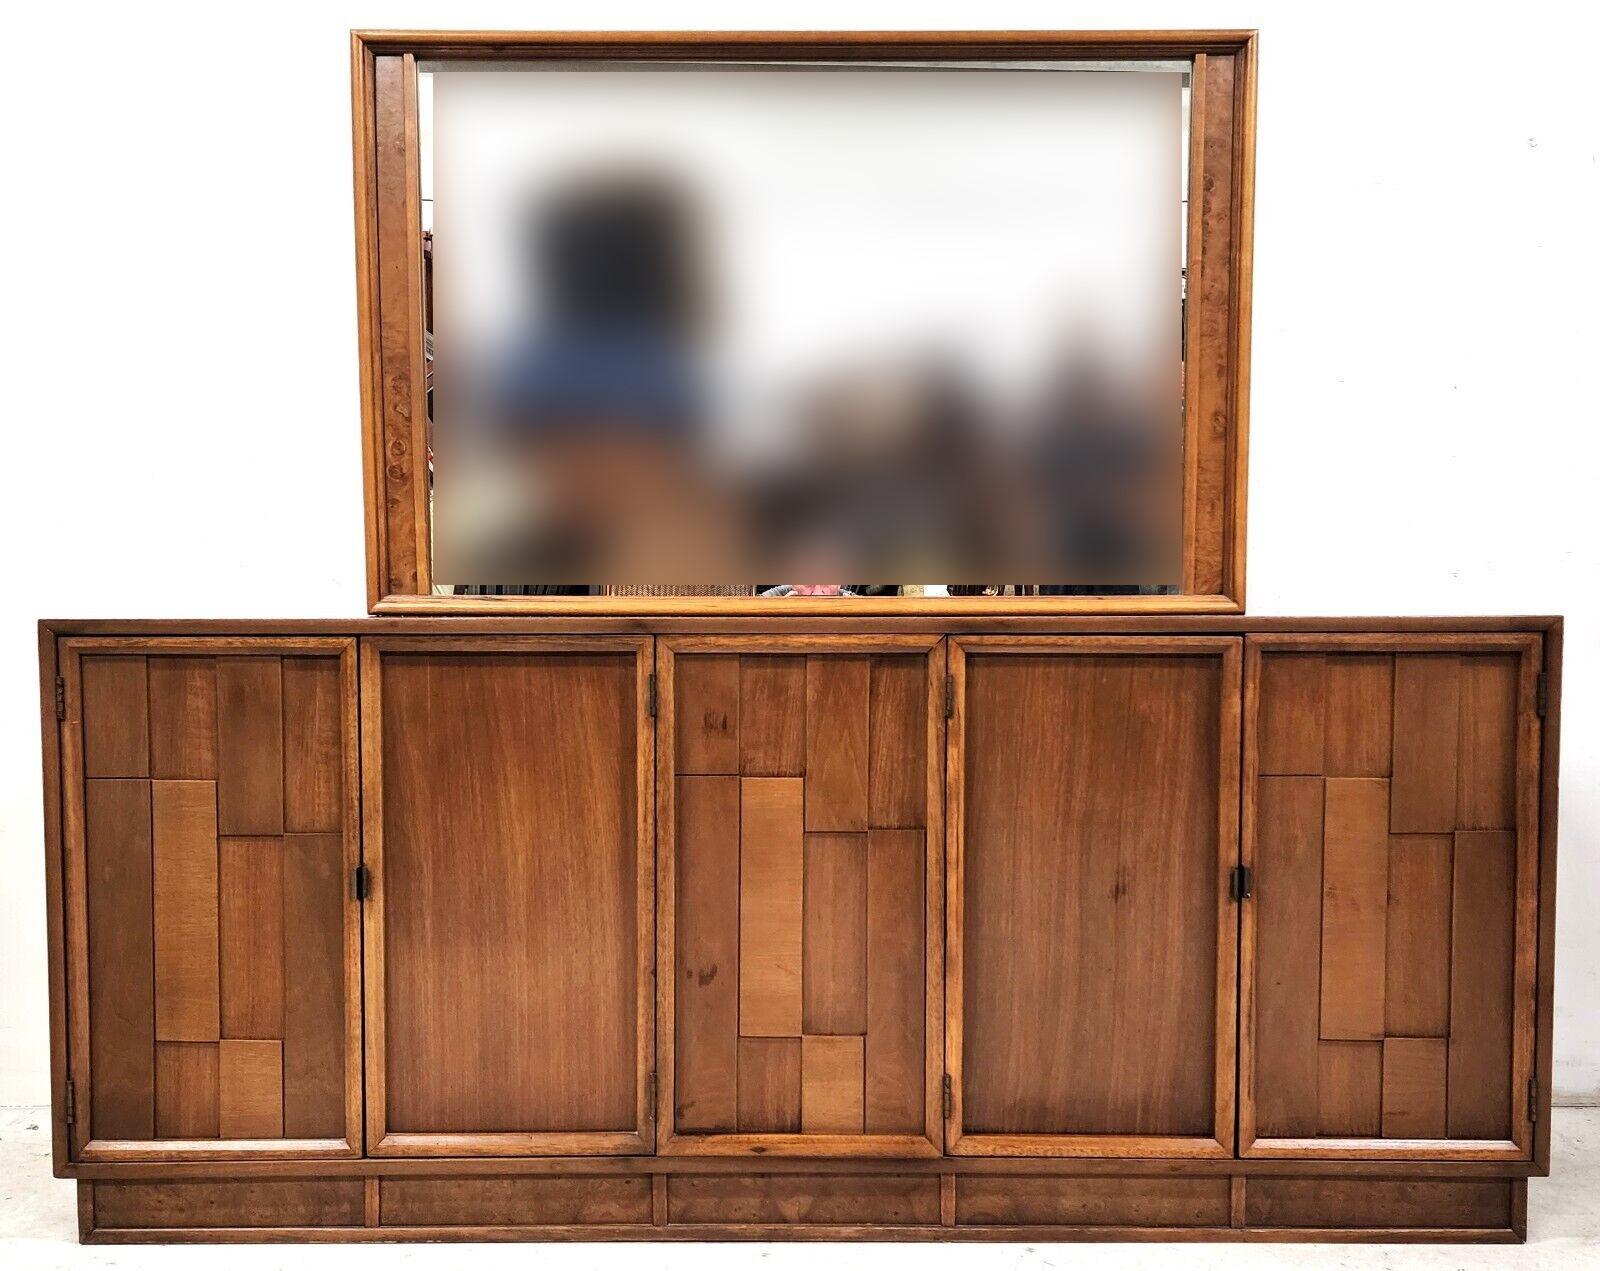 Offering one of our recent palm beach estate fine furniture acquisitions of a 
Brutalist Dresser or Buffet in Walnut by Kroehler
Featuring 3 drawers (on left) and 2 internal shelves (on right).

Approximate measurements in inches
30.75